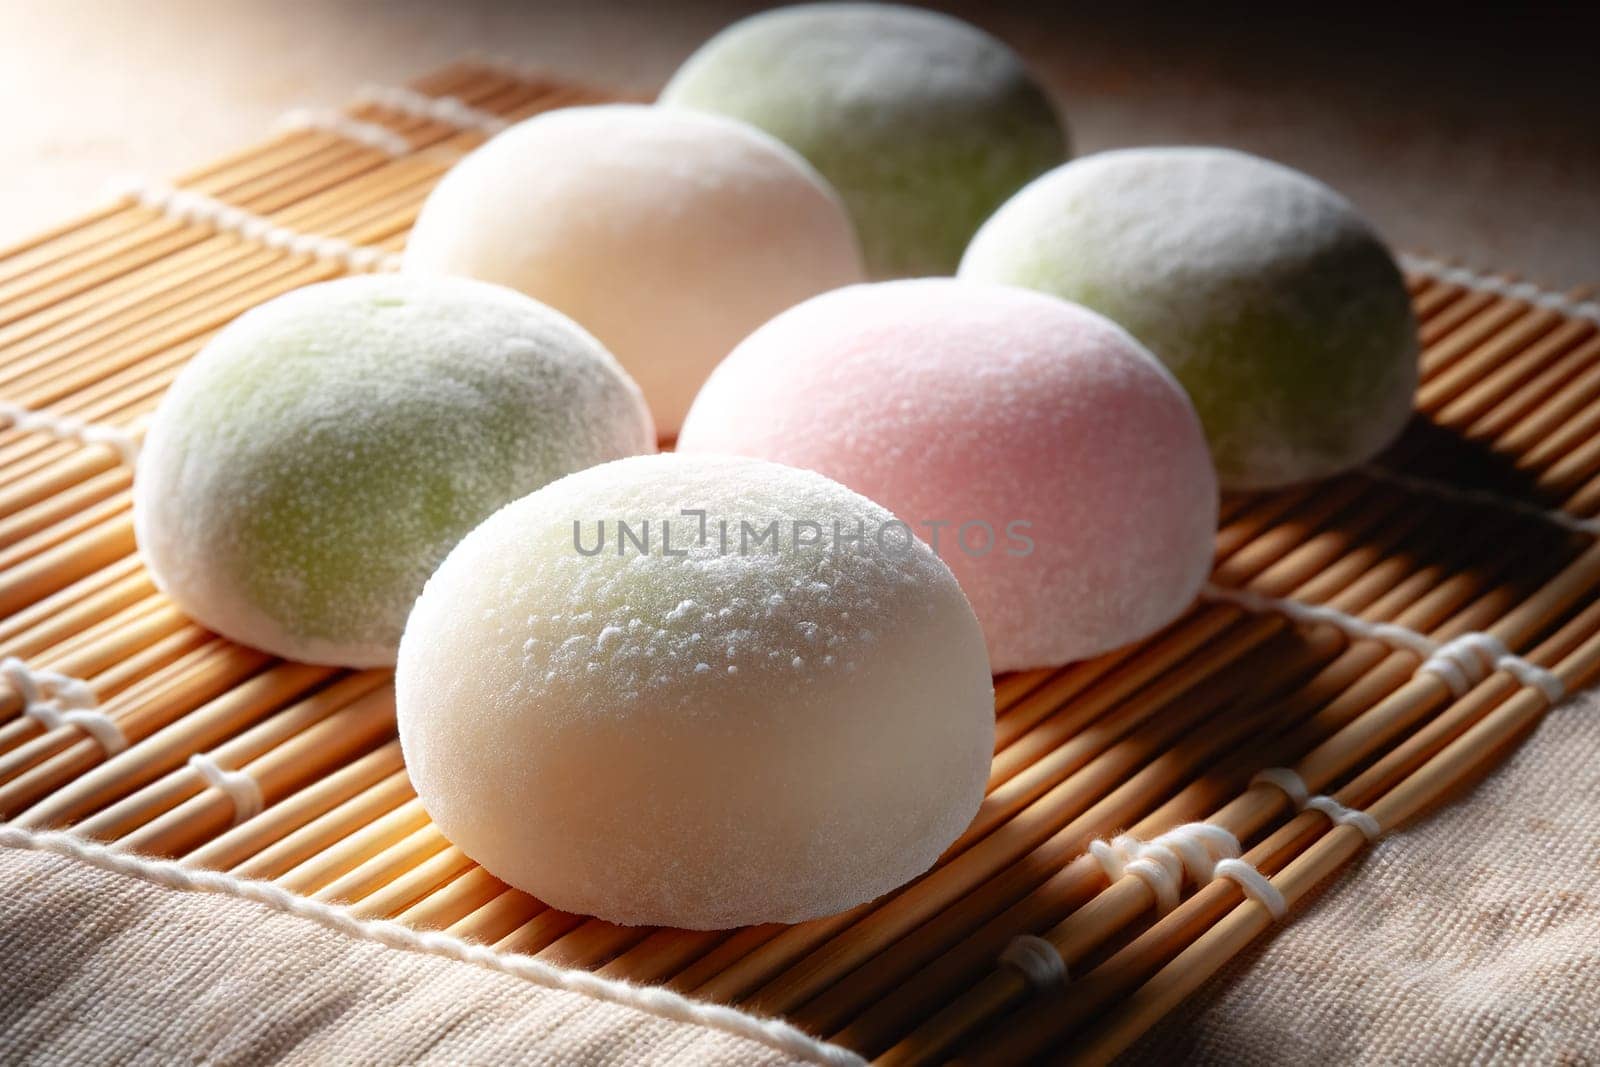 close-up of Japanese mochi on a bamboo mat. The mochi is soft, round, and gently dusted with a fine white powder.